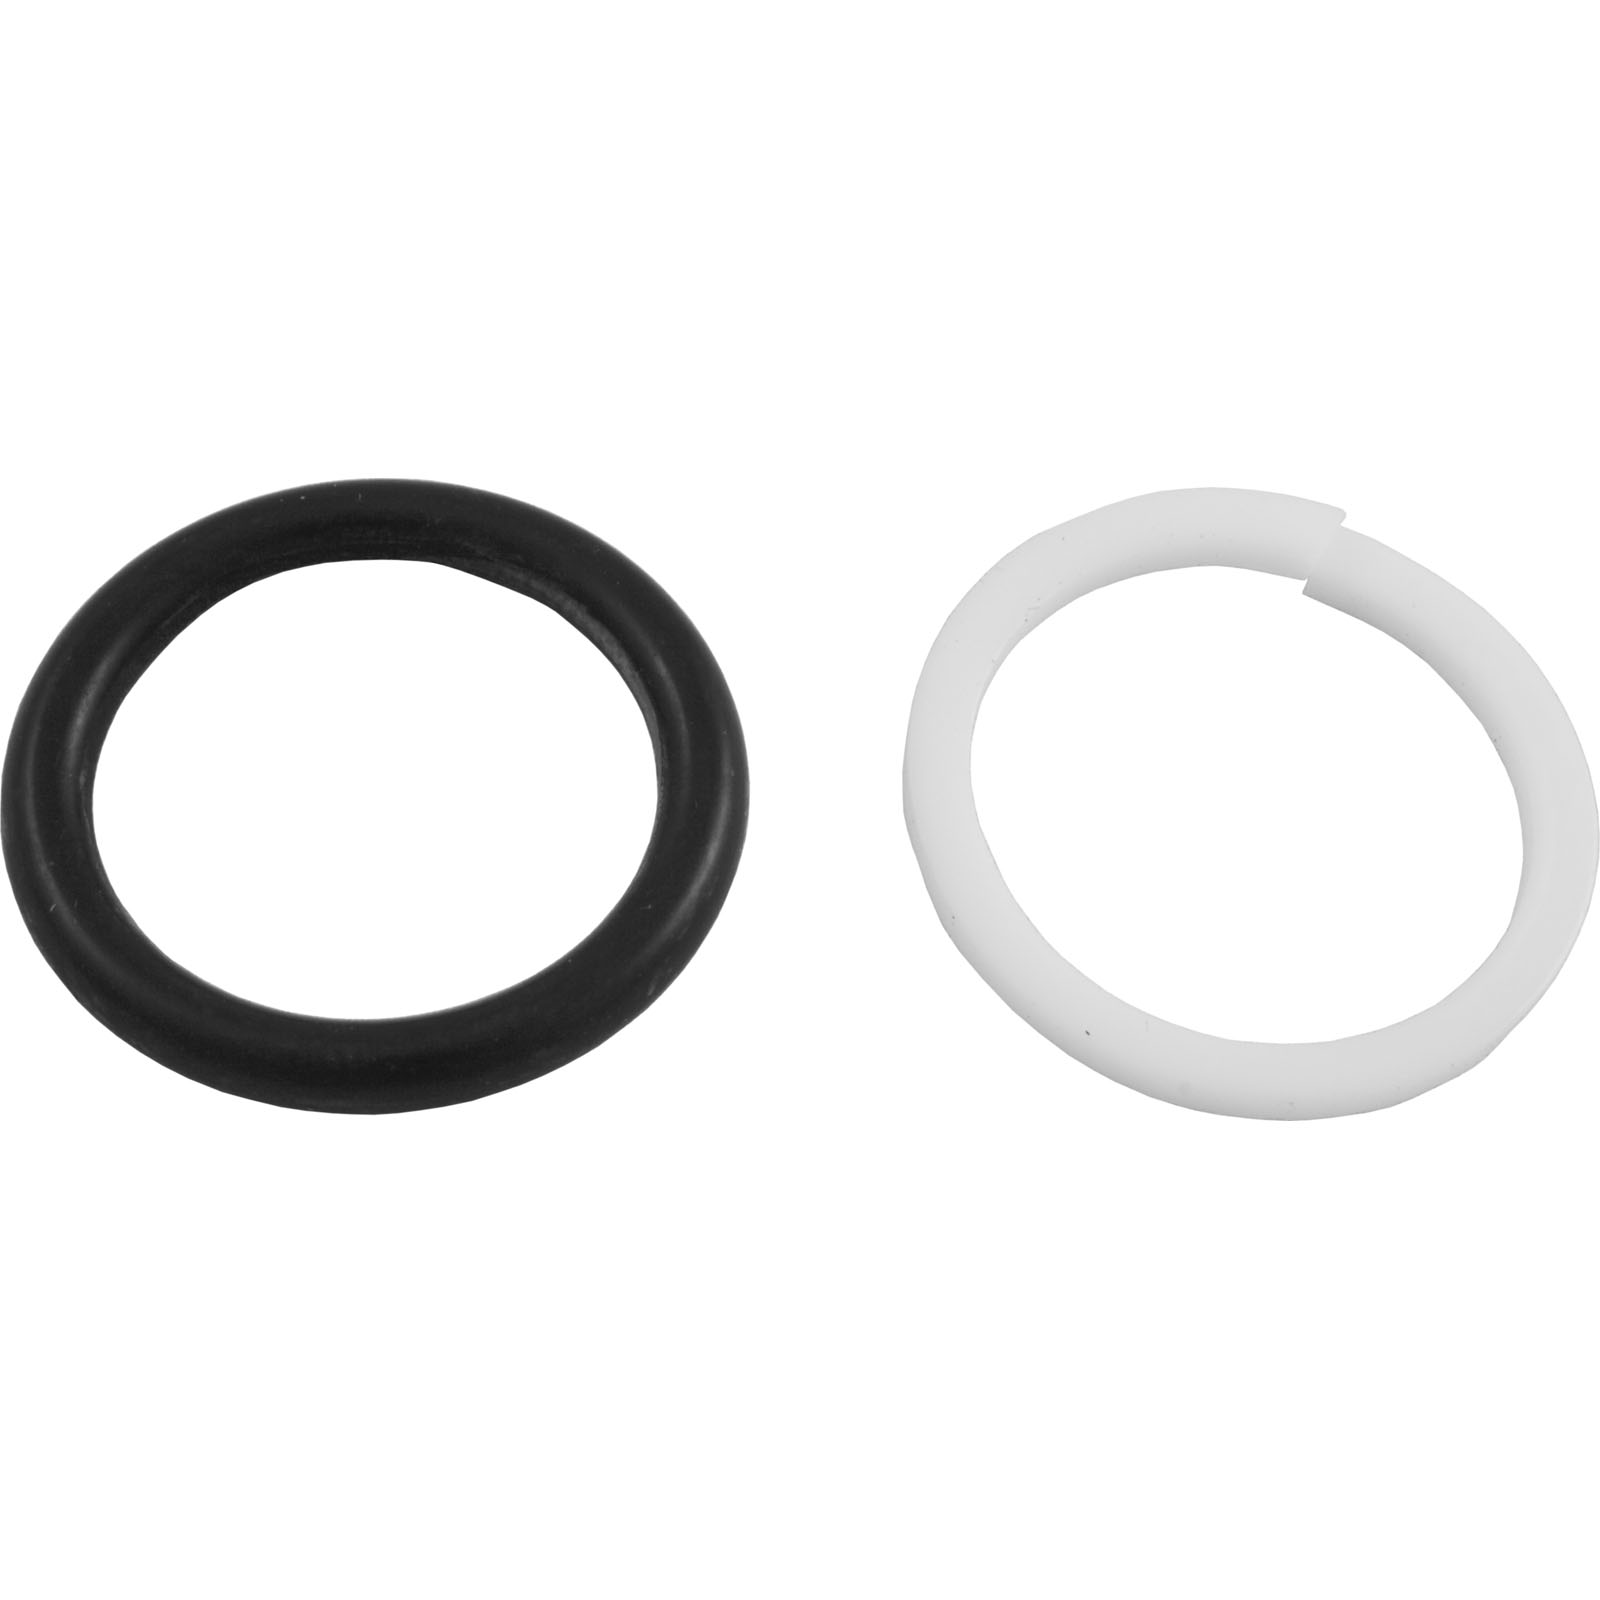 Bedford Precision 15-2739 Teflon O-Ring - Replacement for Graco 117-285:  Amazon.com: Tools & Home Improvement